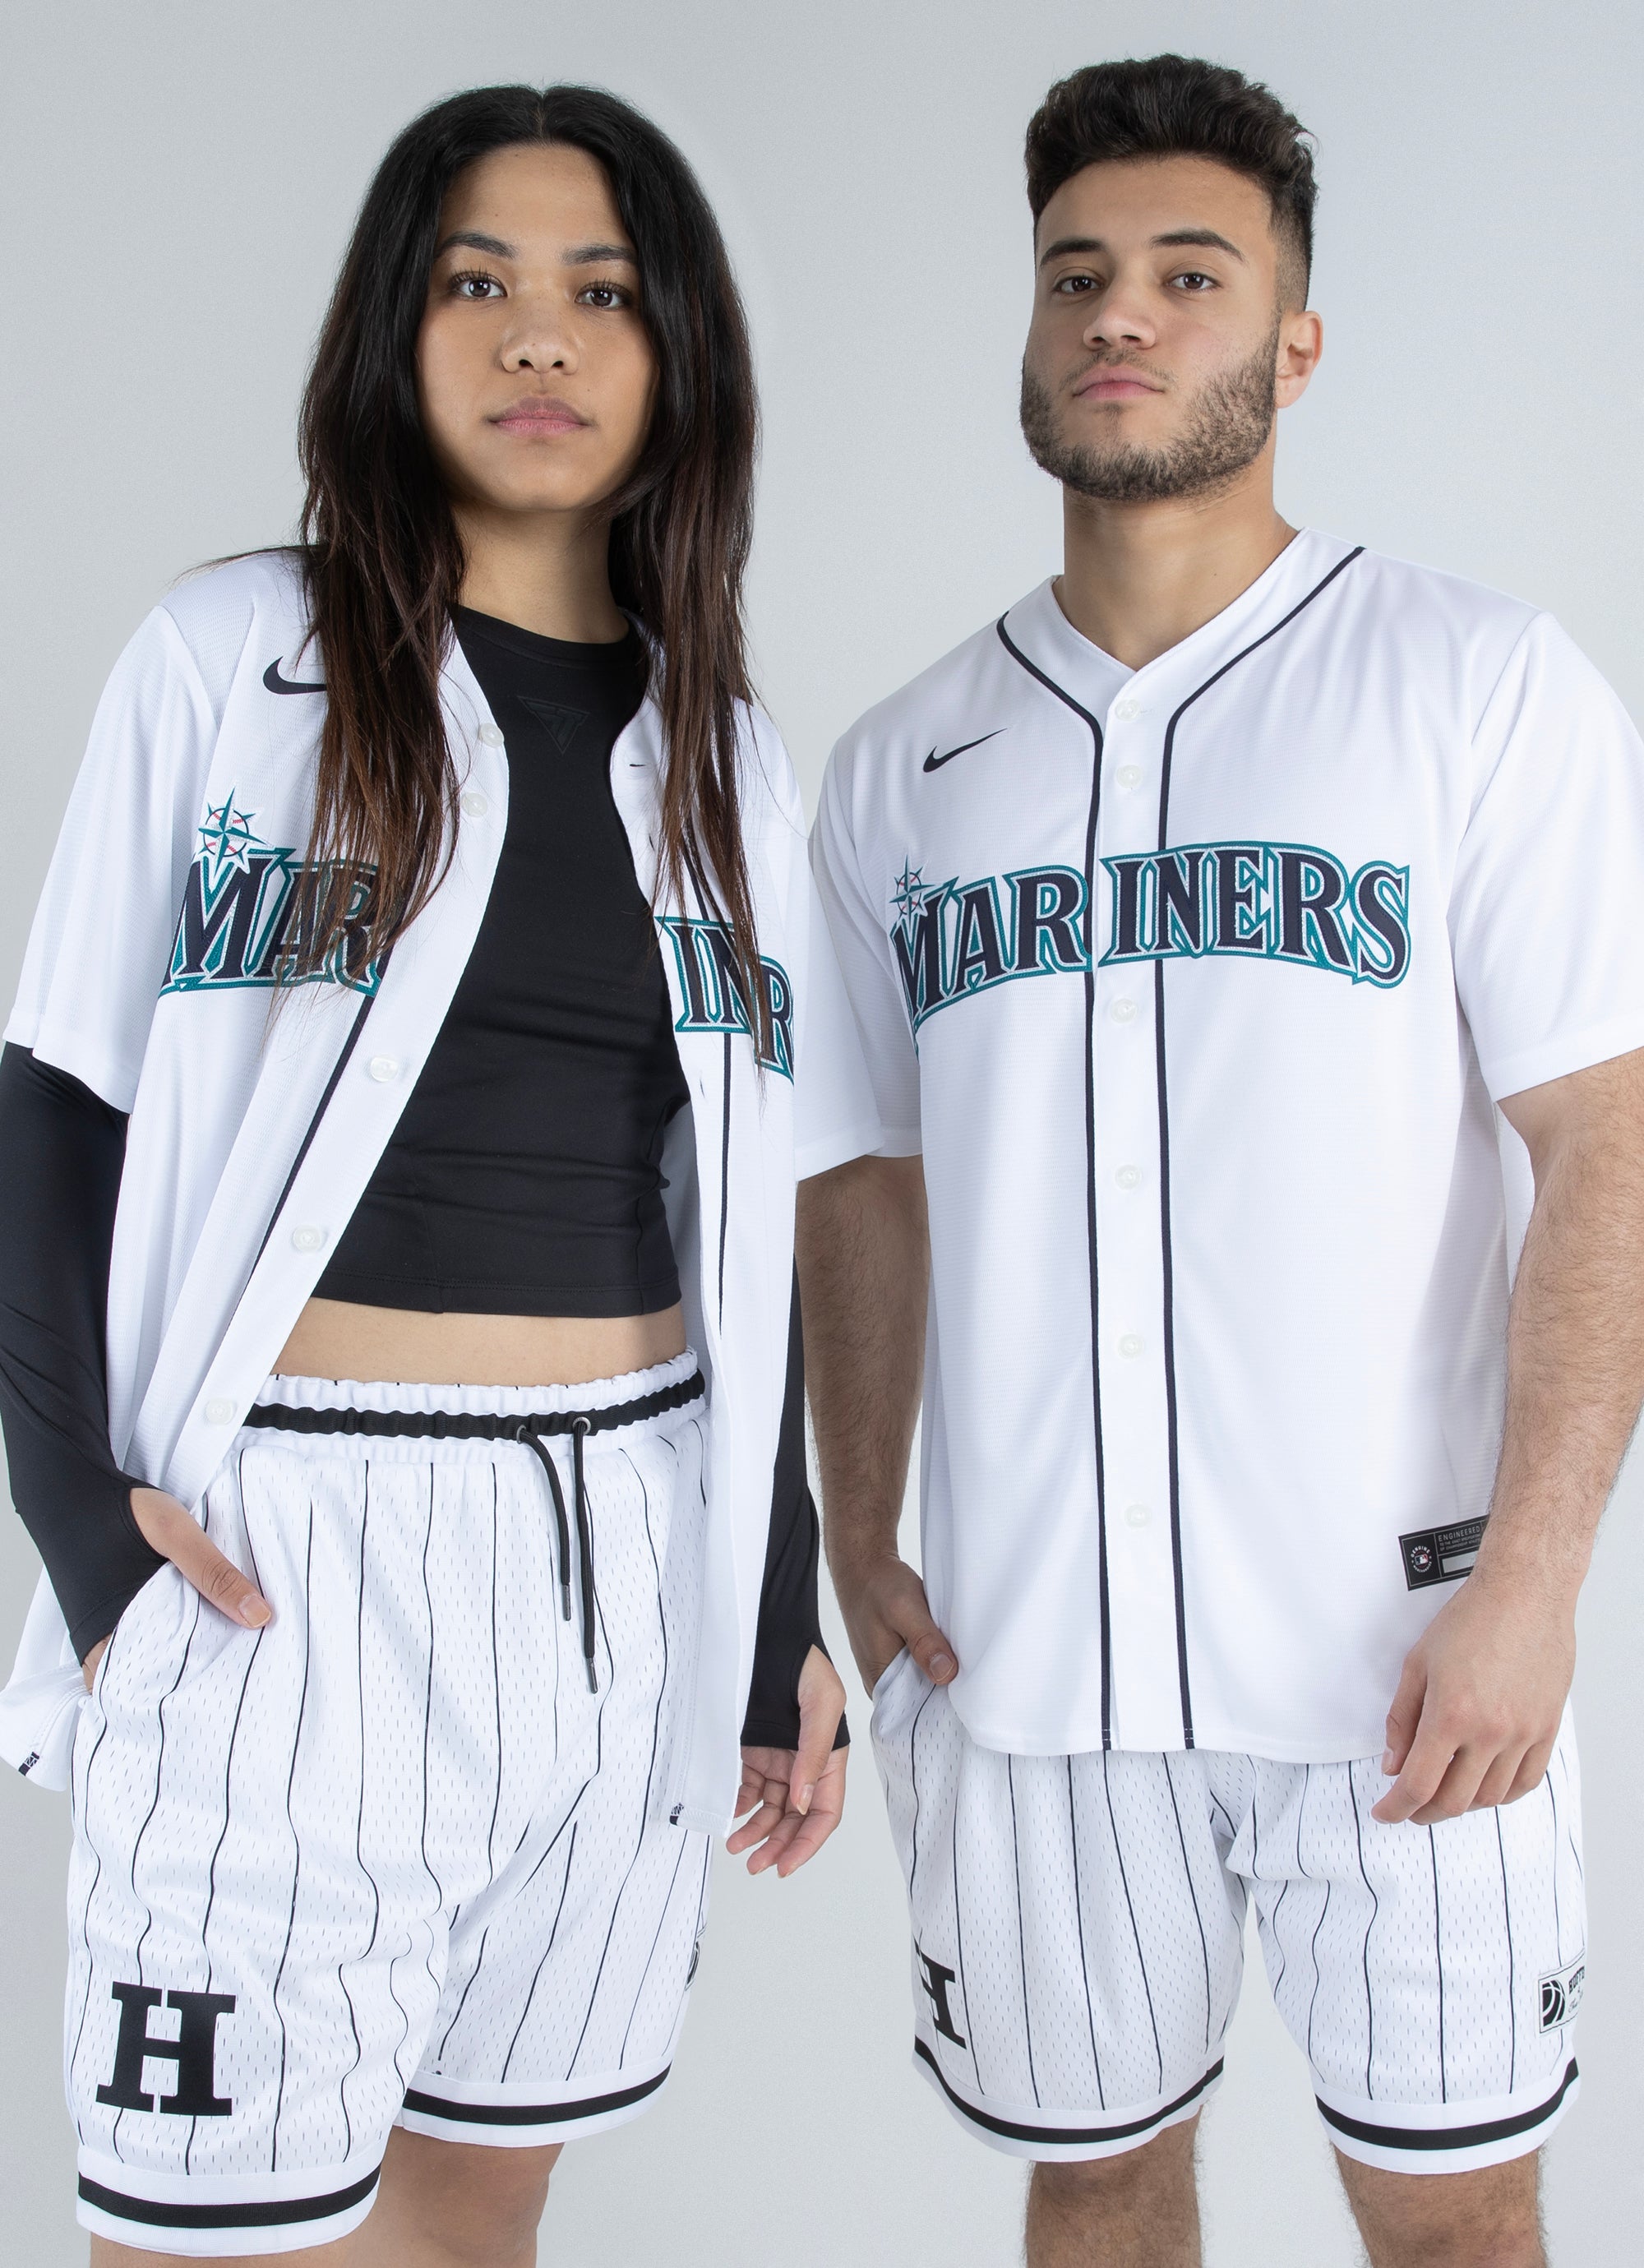 Nike X Mlb Seattle Mariners Official Replica Jersey in White